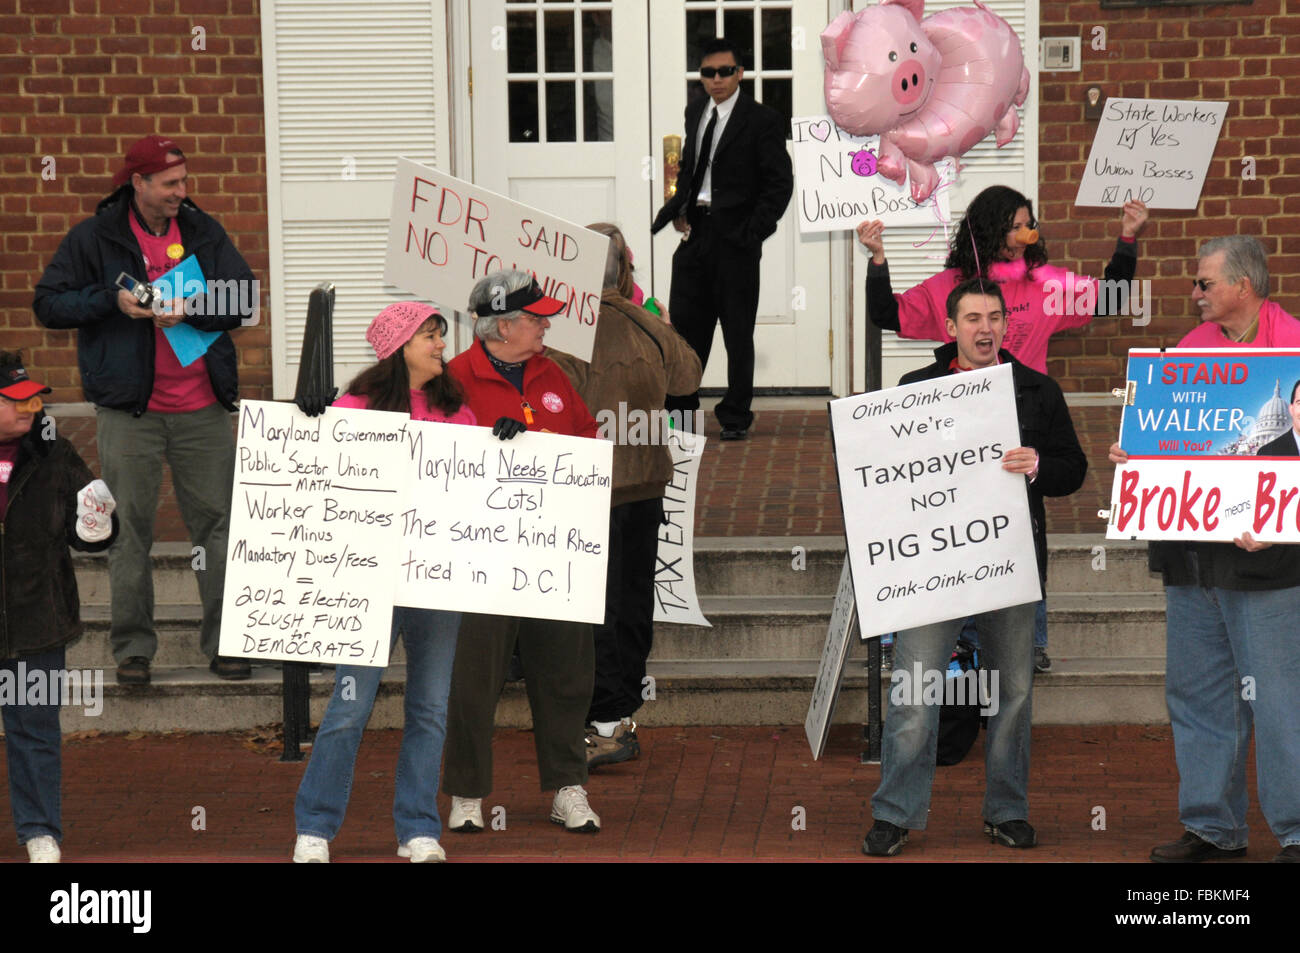 Anti union protesters at the statehouse in Annapolis, Maryland Stock Photo